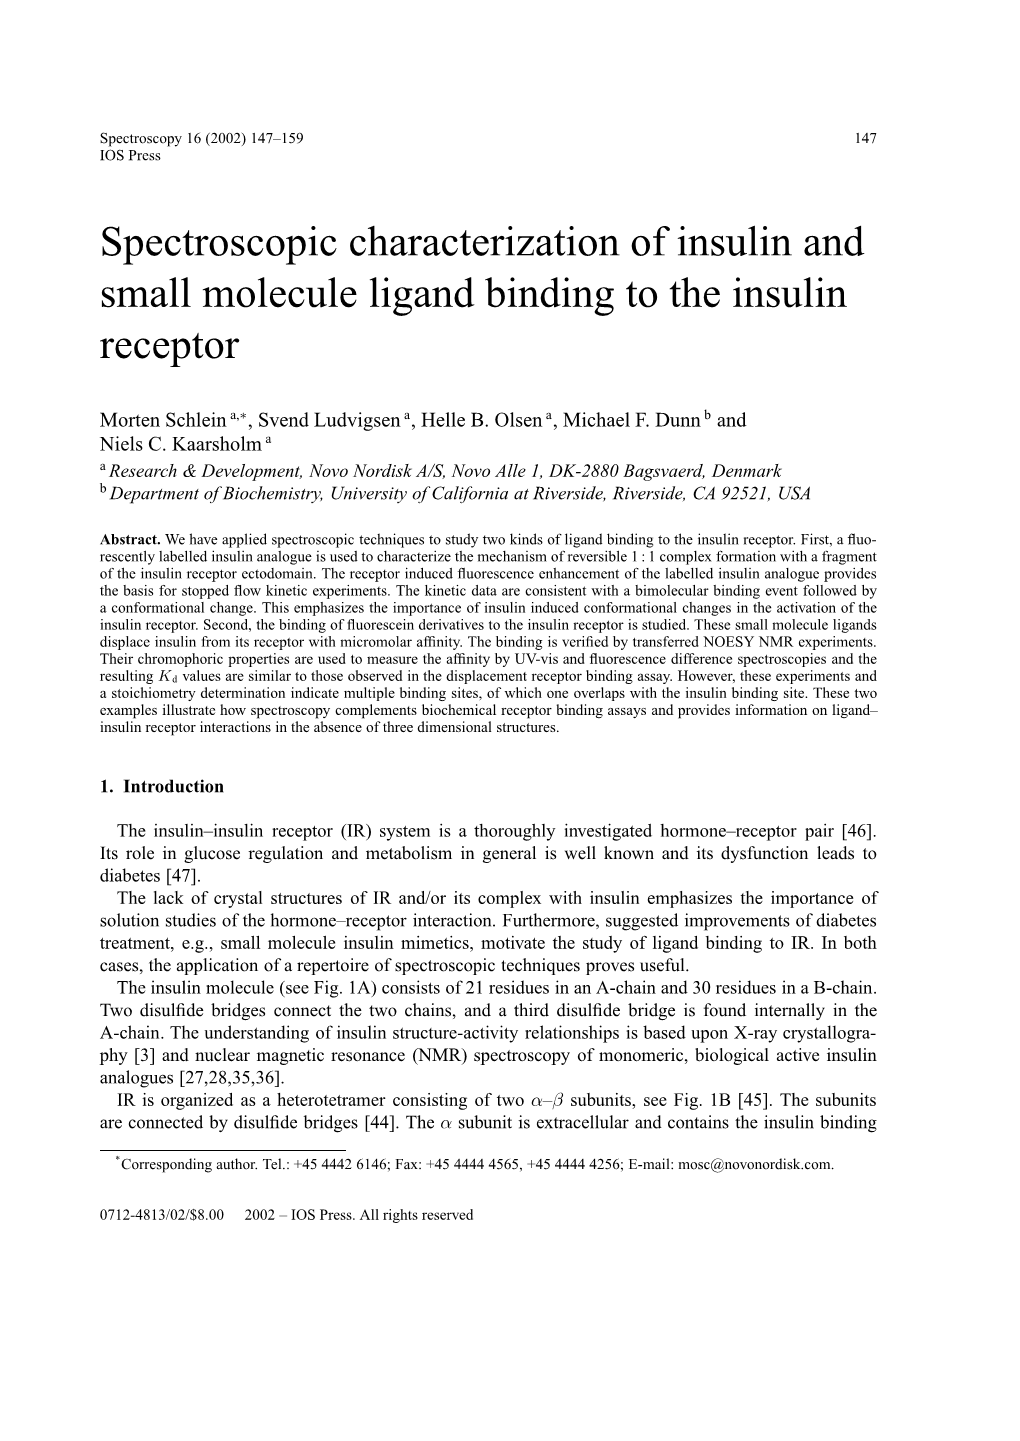 Spectroscopic Characterization of Insulin and Small Molecule Ligand Binding to the Insulin Receptor